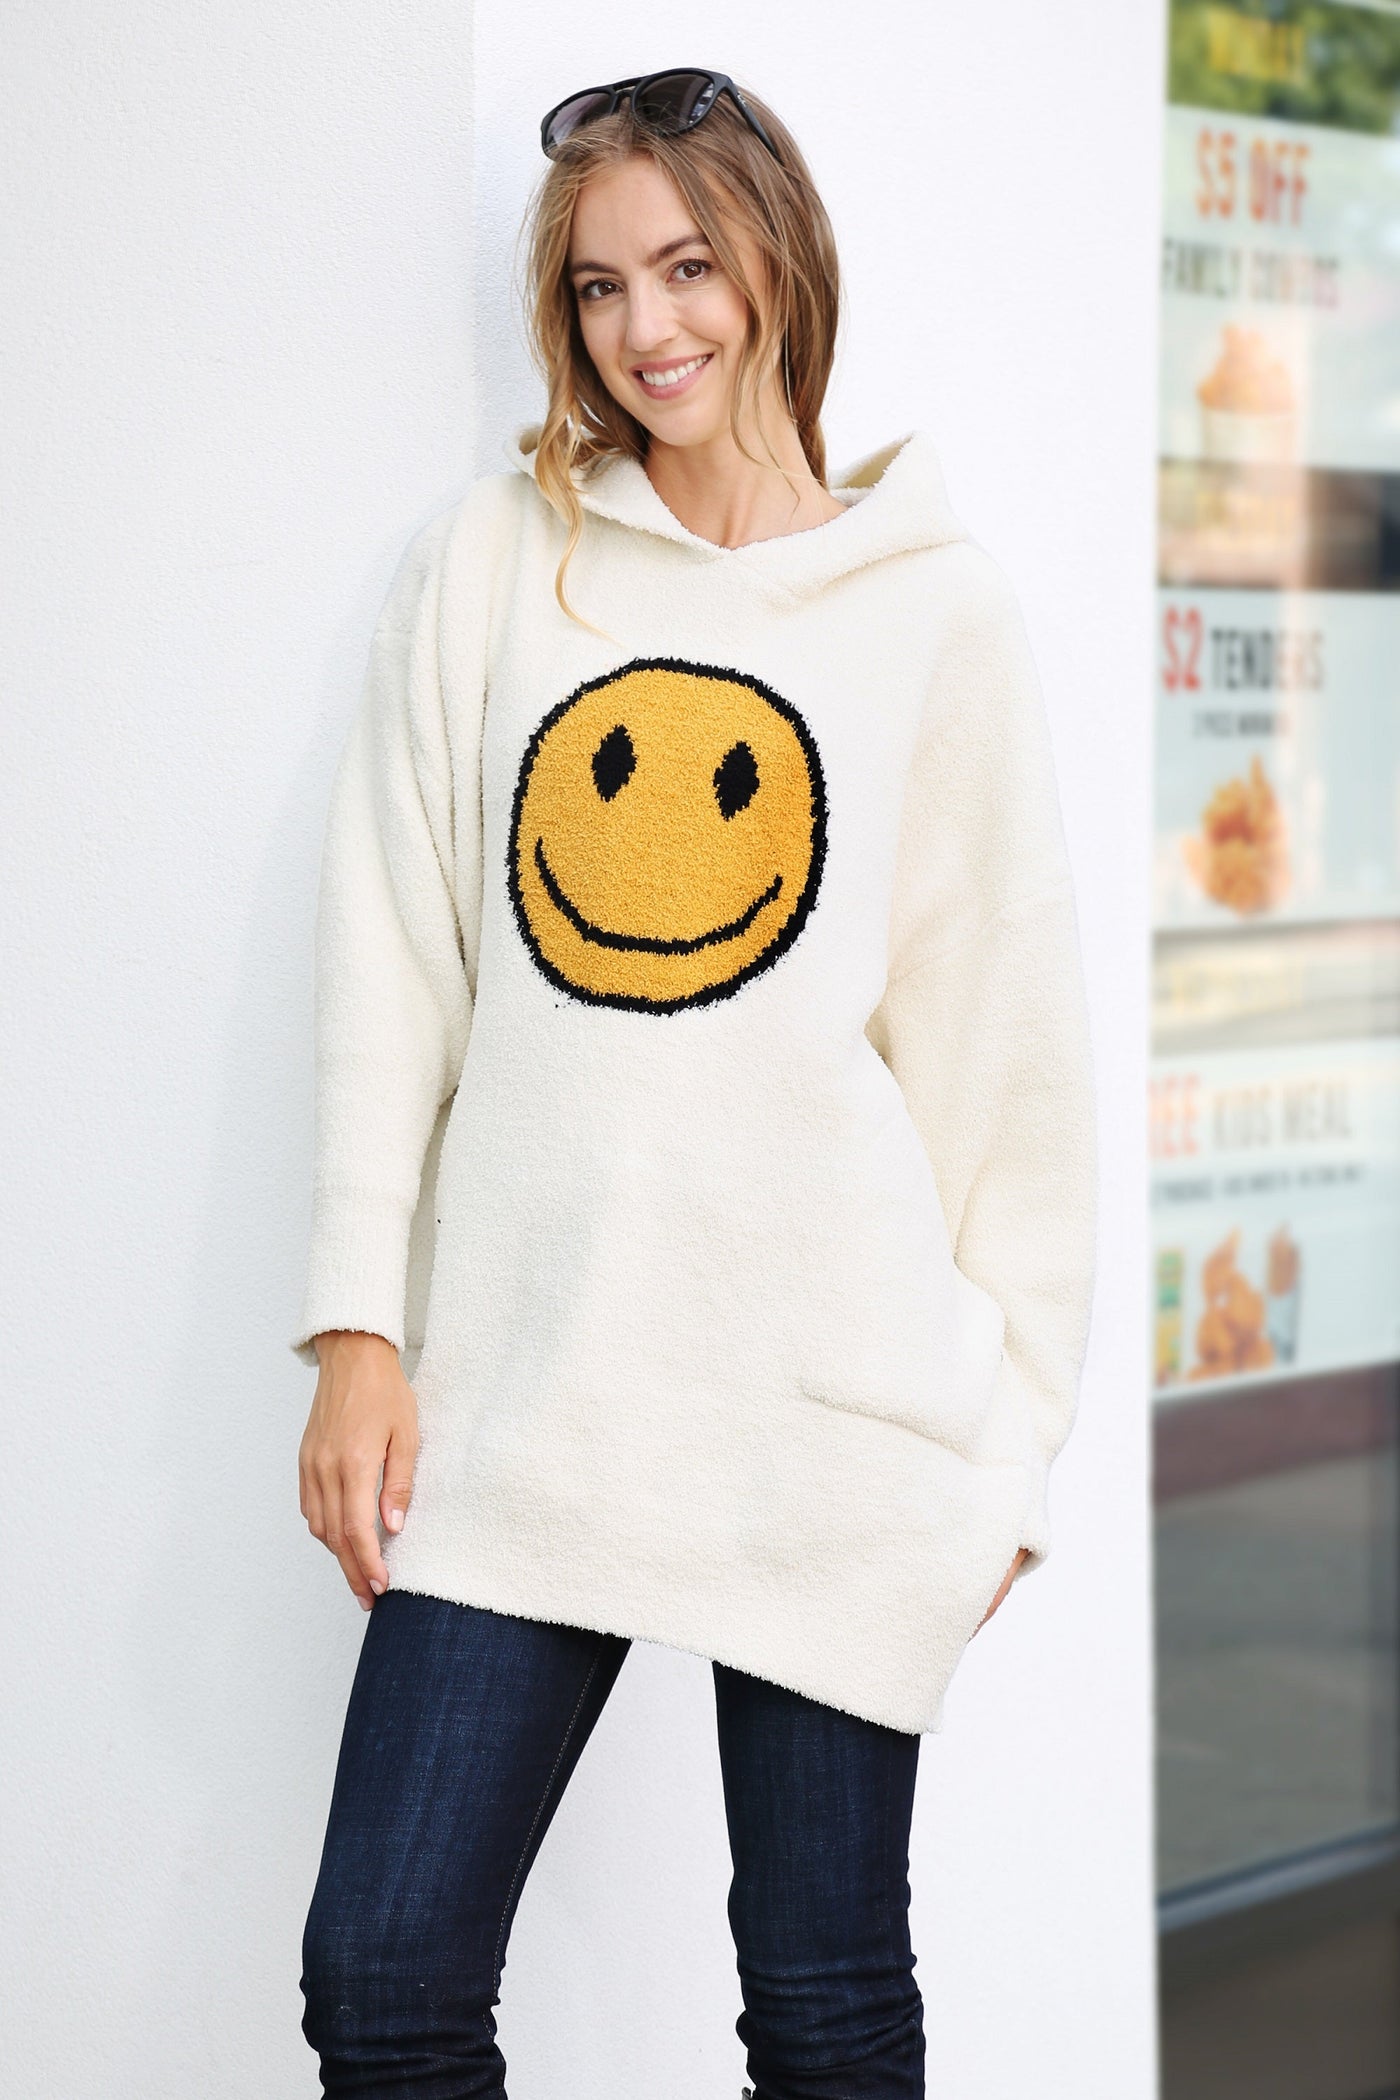 JCL4010 Super Lux Smiley Face Hooded Wearable Blanket